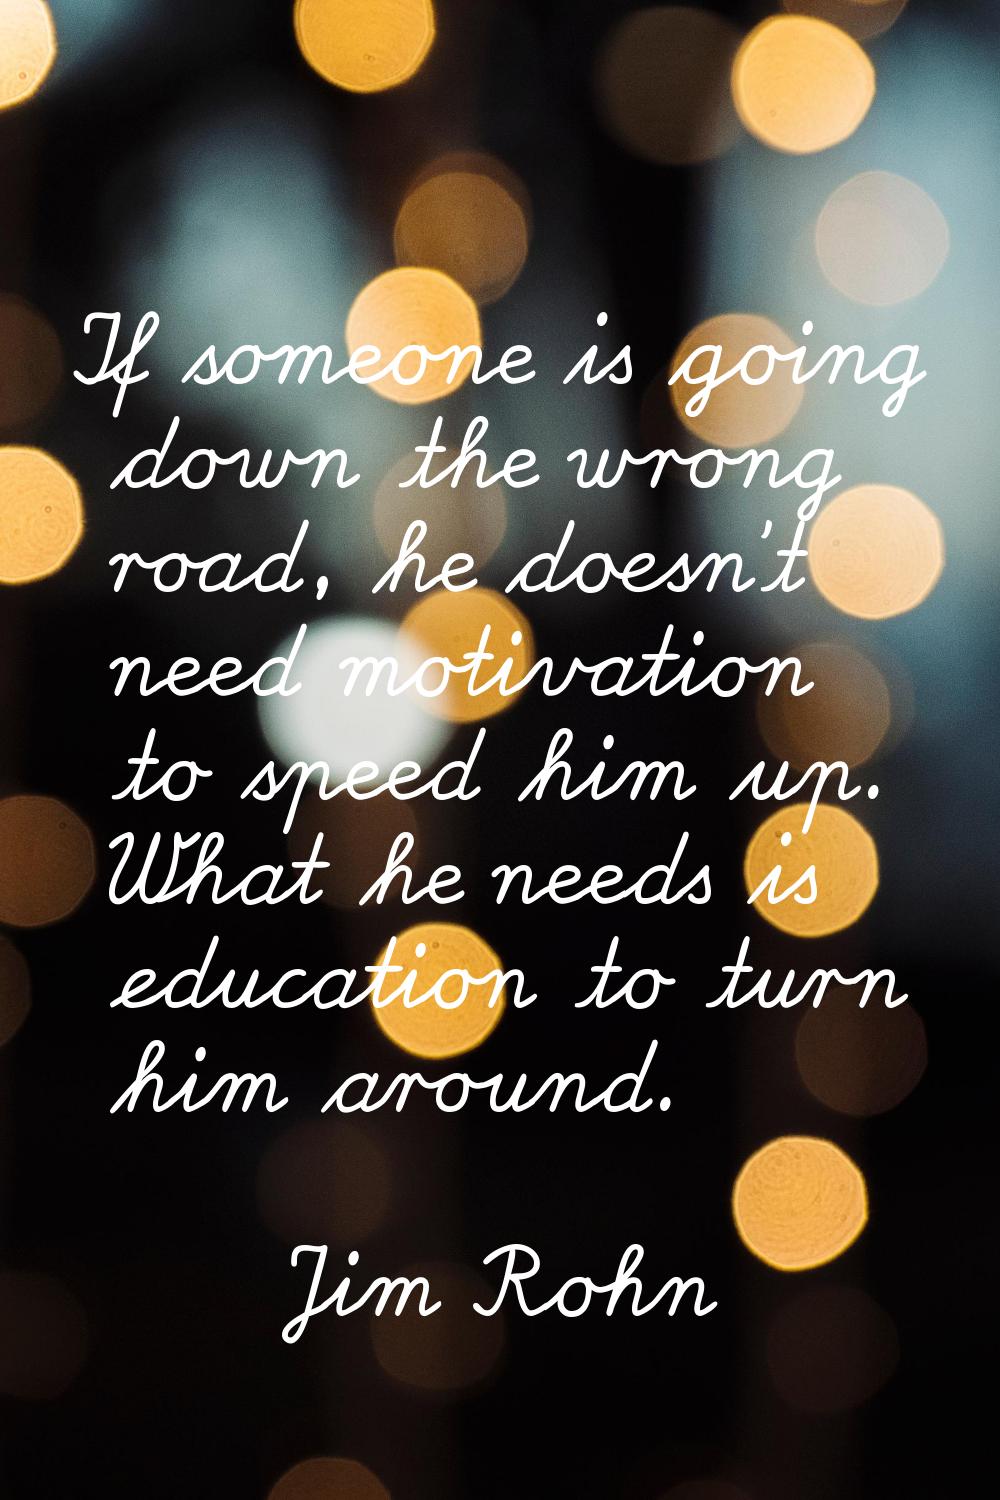 If someone is going down the wrong road, he doesn't need motivation to speed him up. What he needs 